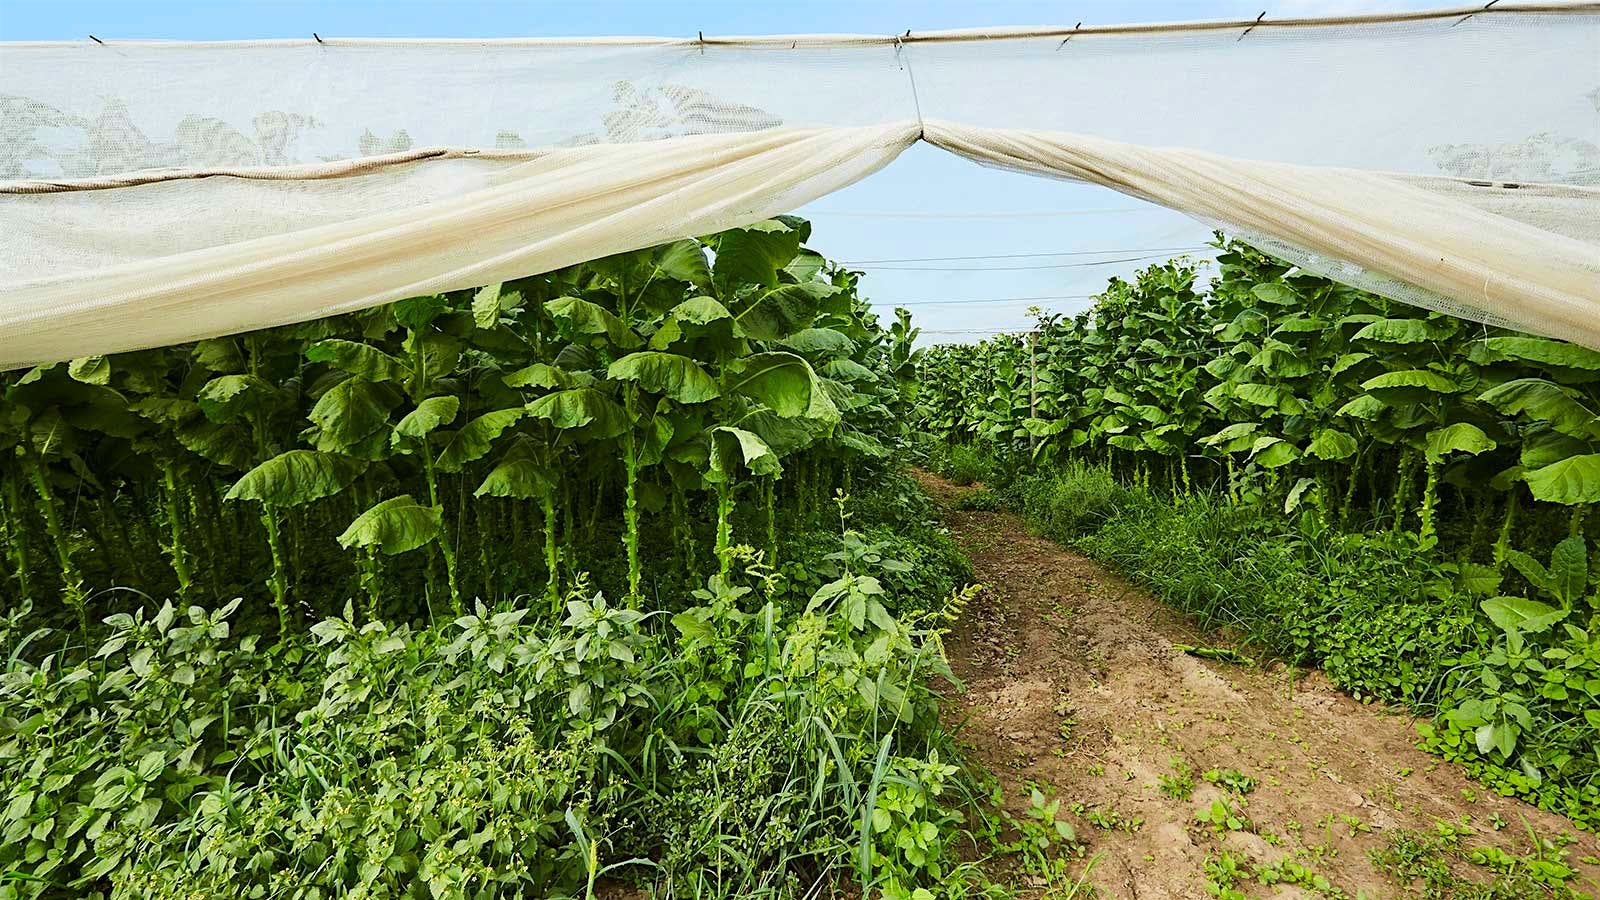 Connecticut Shade is grown under elaborate tents of screen-like netting made of cheesecloth that filter the sun, making for thinner, finer tobacco.